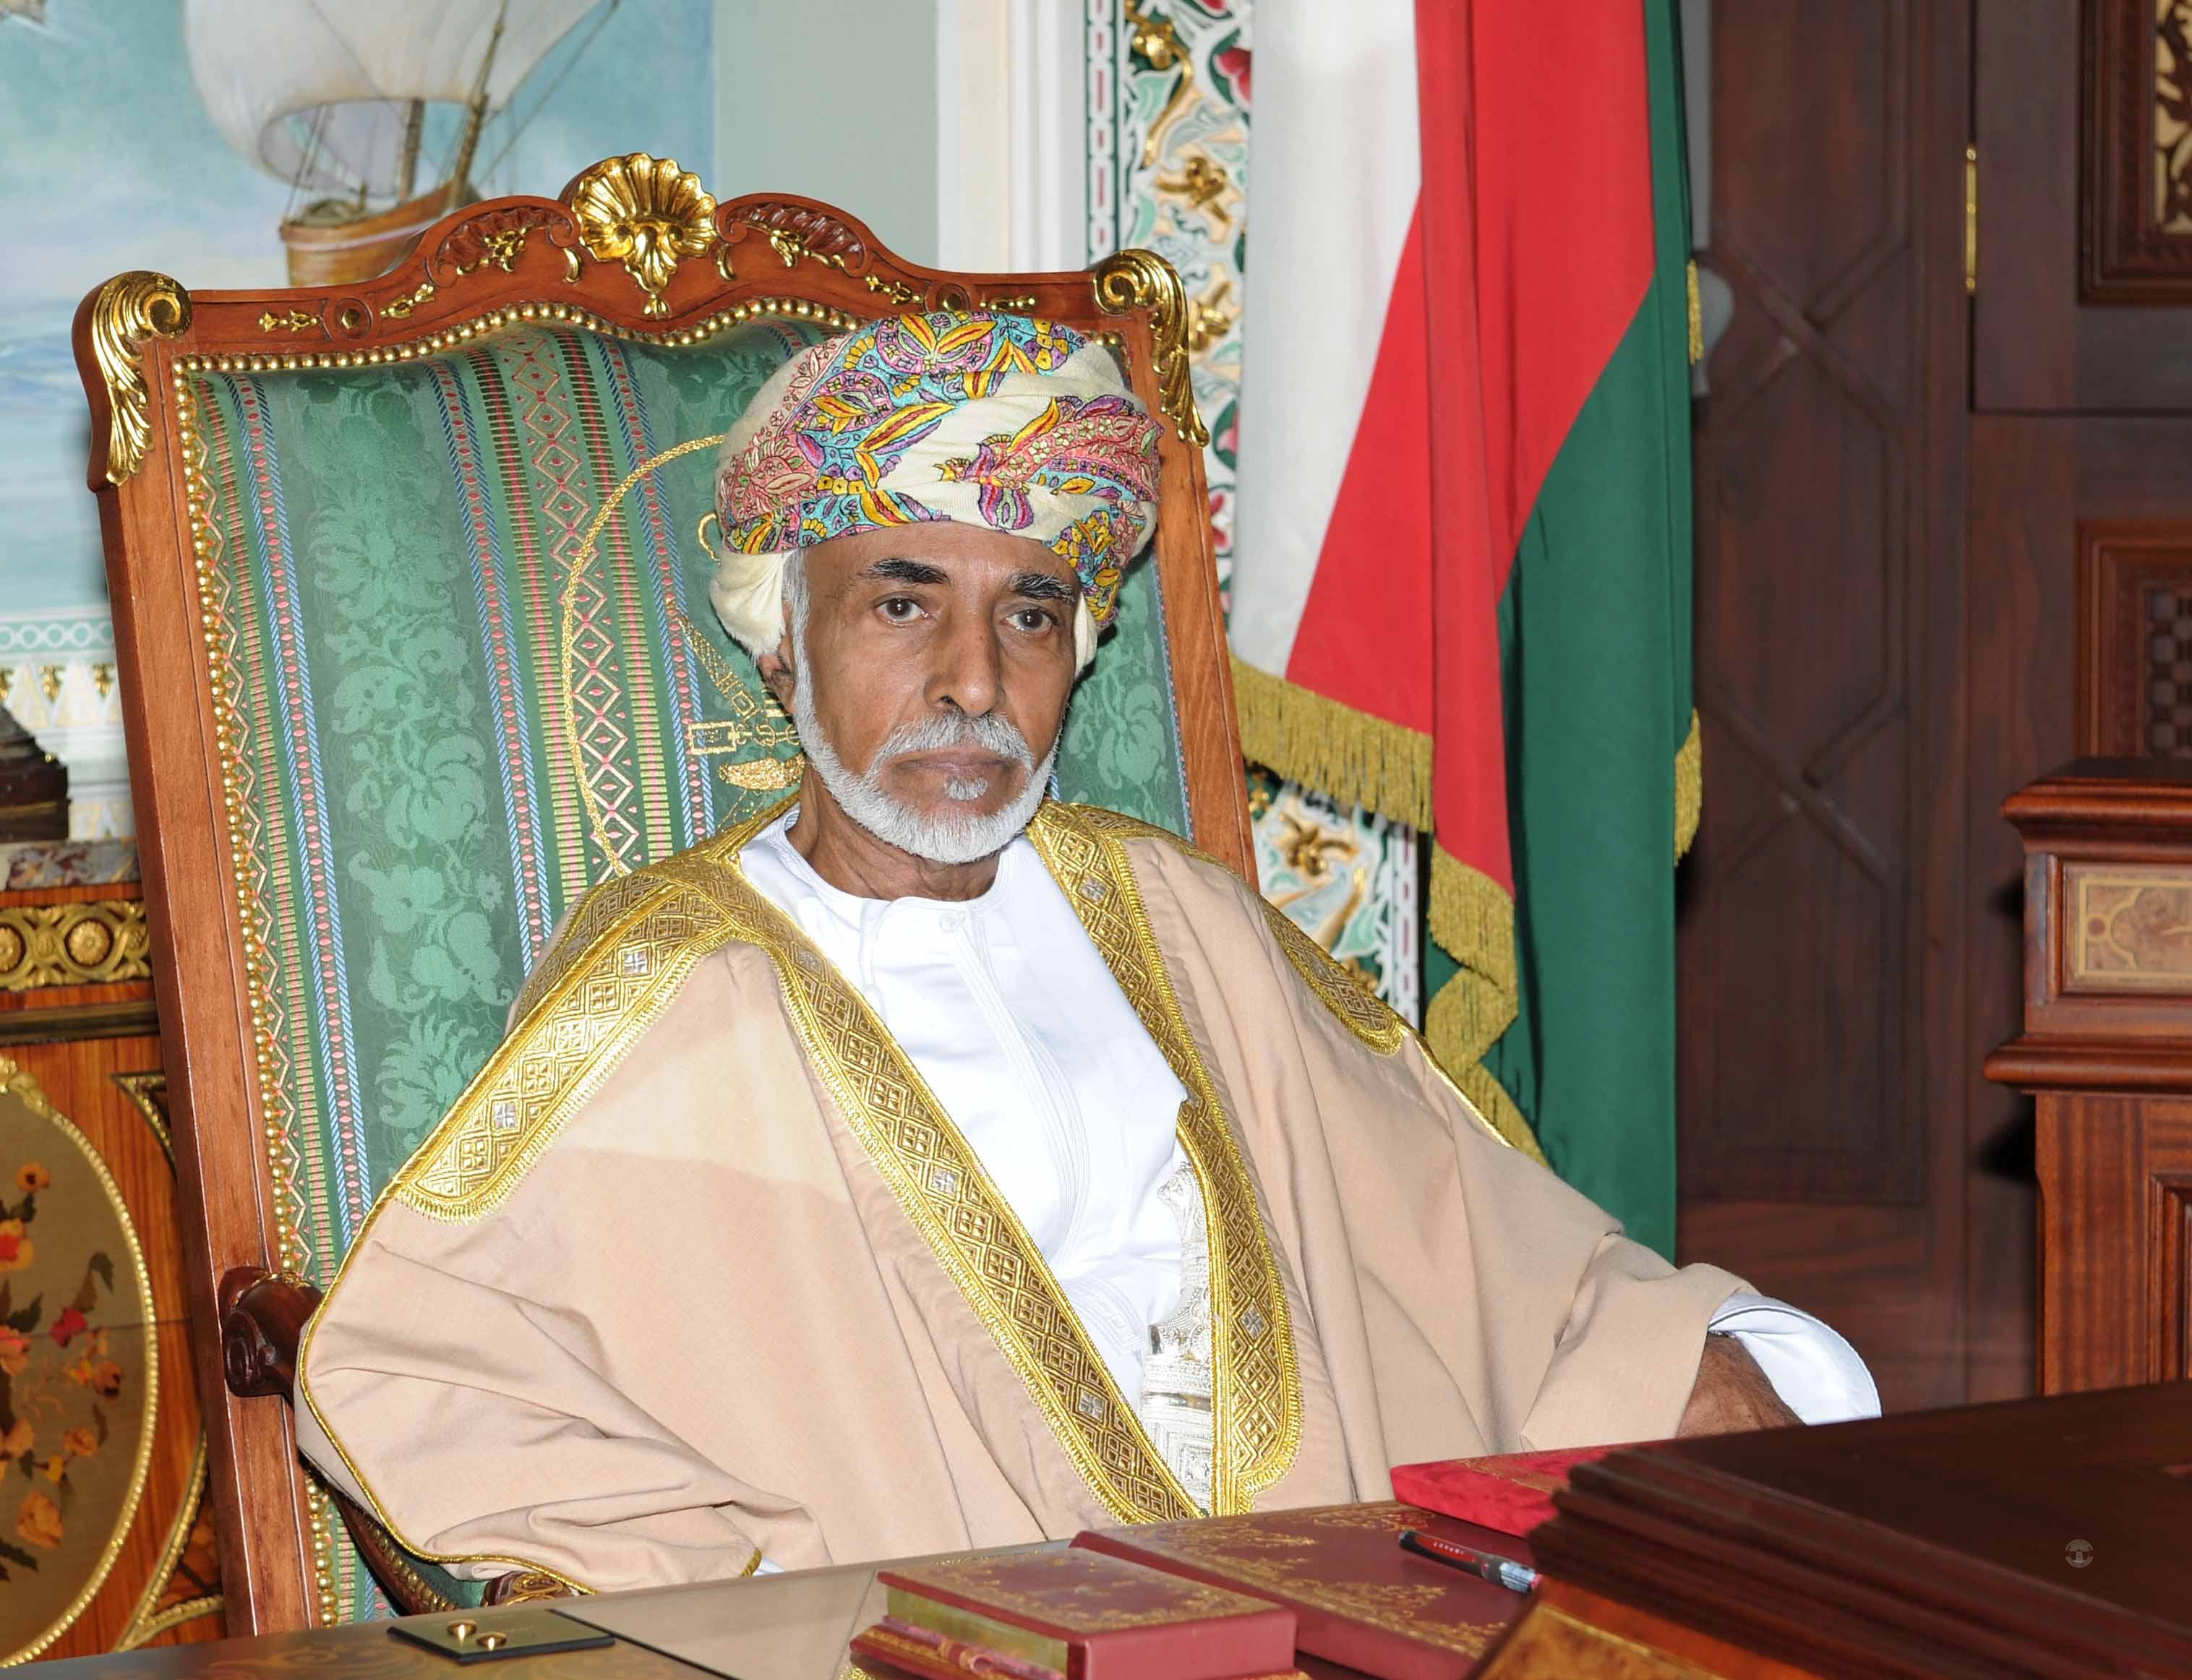 His Majesty Sultan Qaboos sends greetings to Governor-General of Saint Lucia